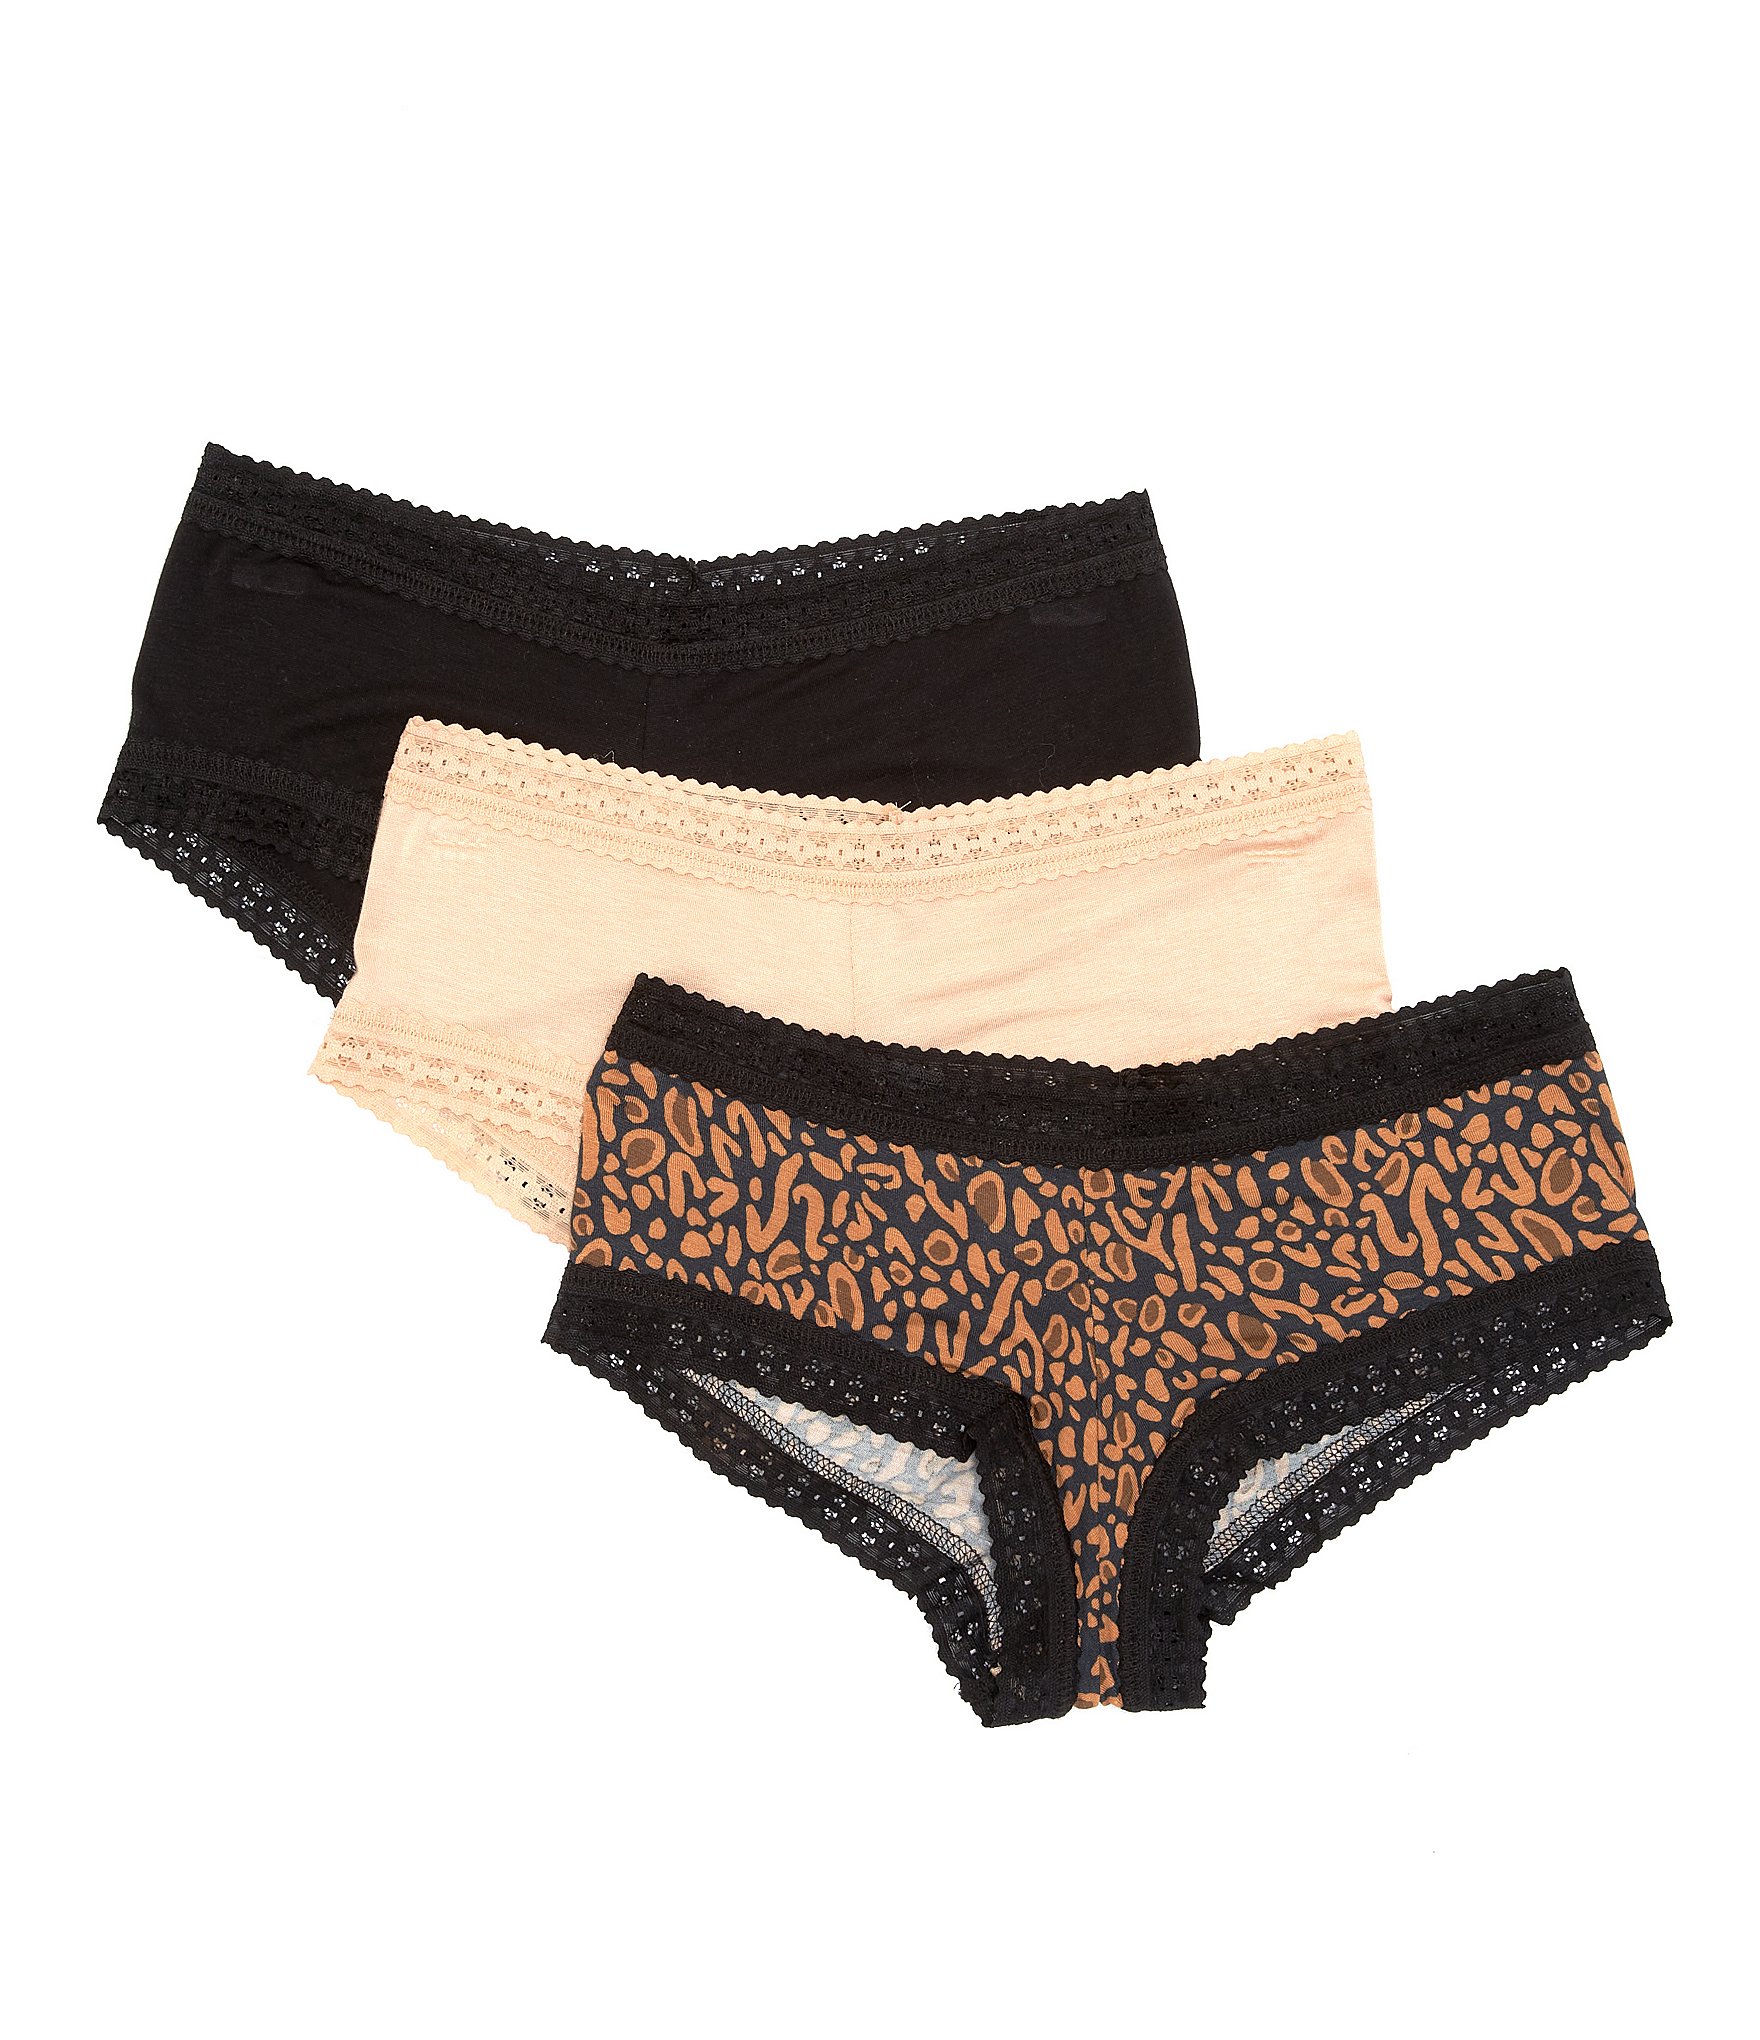 Buy Hanky Panky Women's Rise Cotton 3 Pack, Black/Chai/White, One Size at